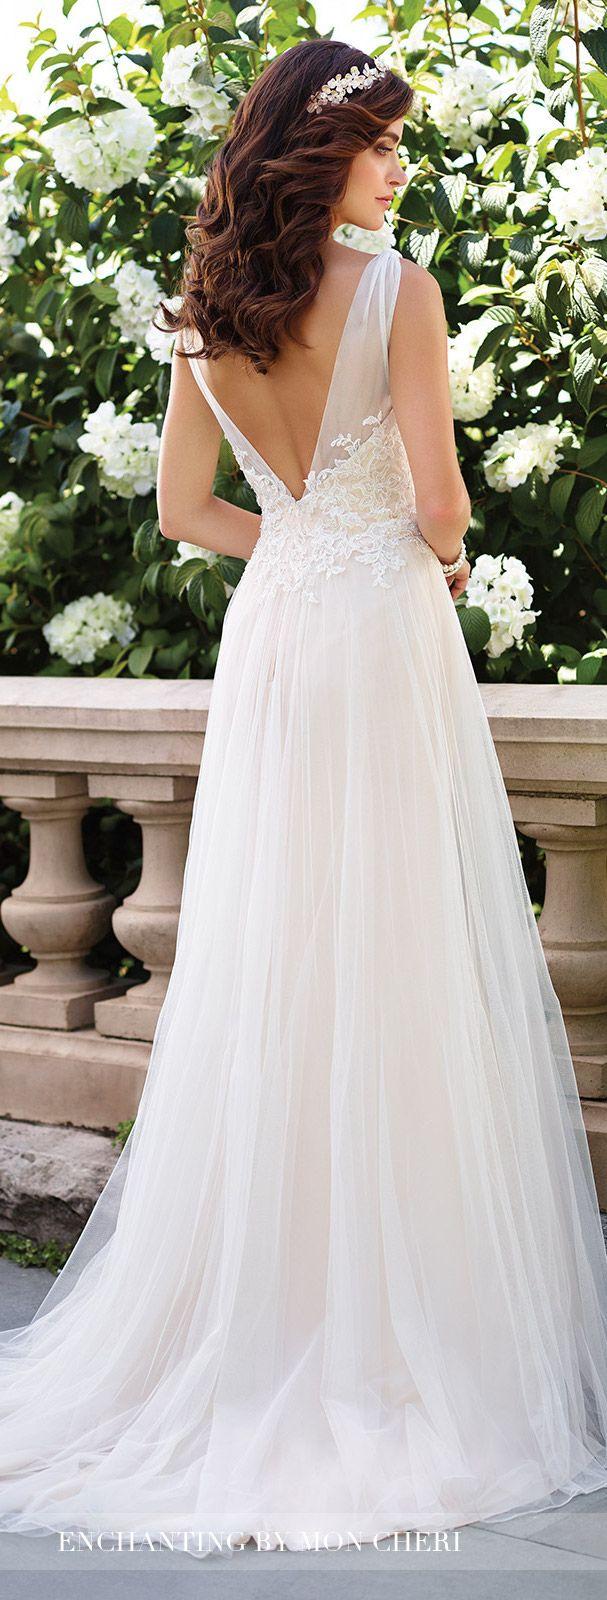 Wedding - Tulle And Lace A-Line Wedding Dress- 117176- Enchanting By Mon Cheri